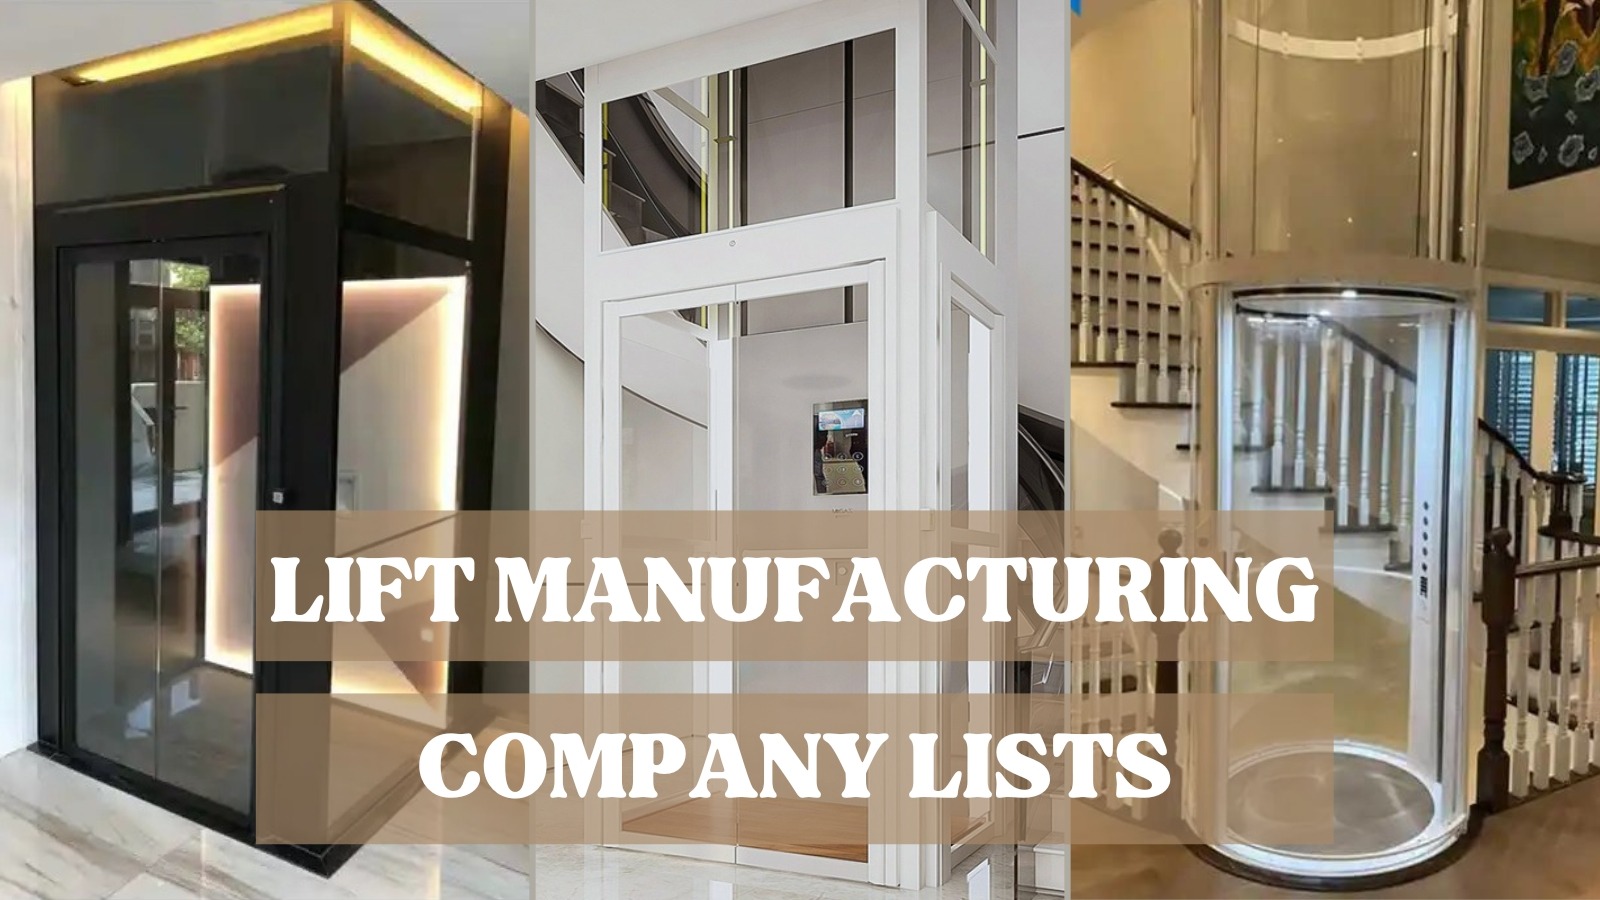 Top Lift Manufacturing Company in Chennai